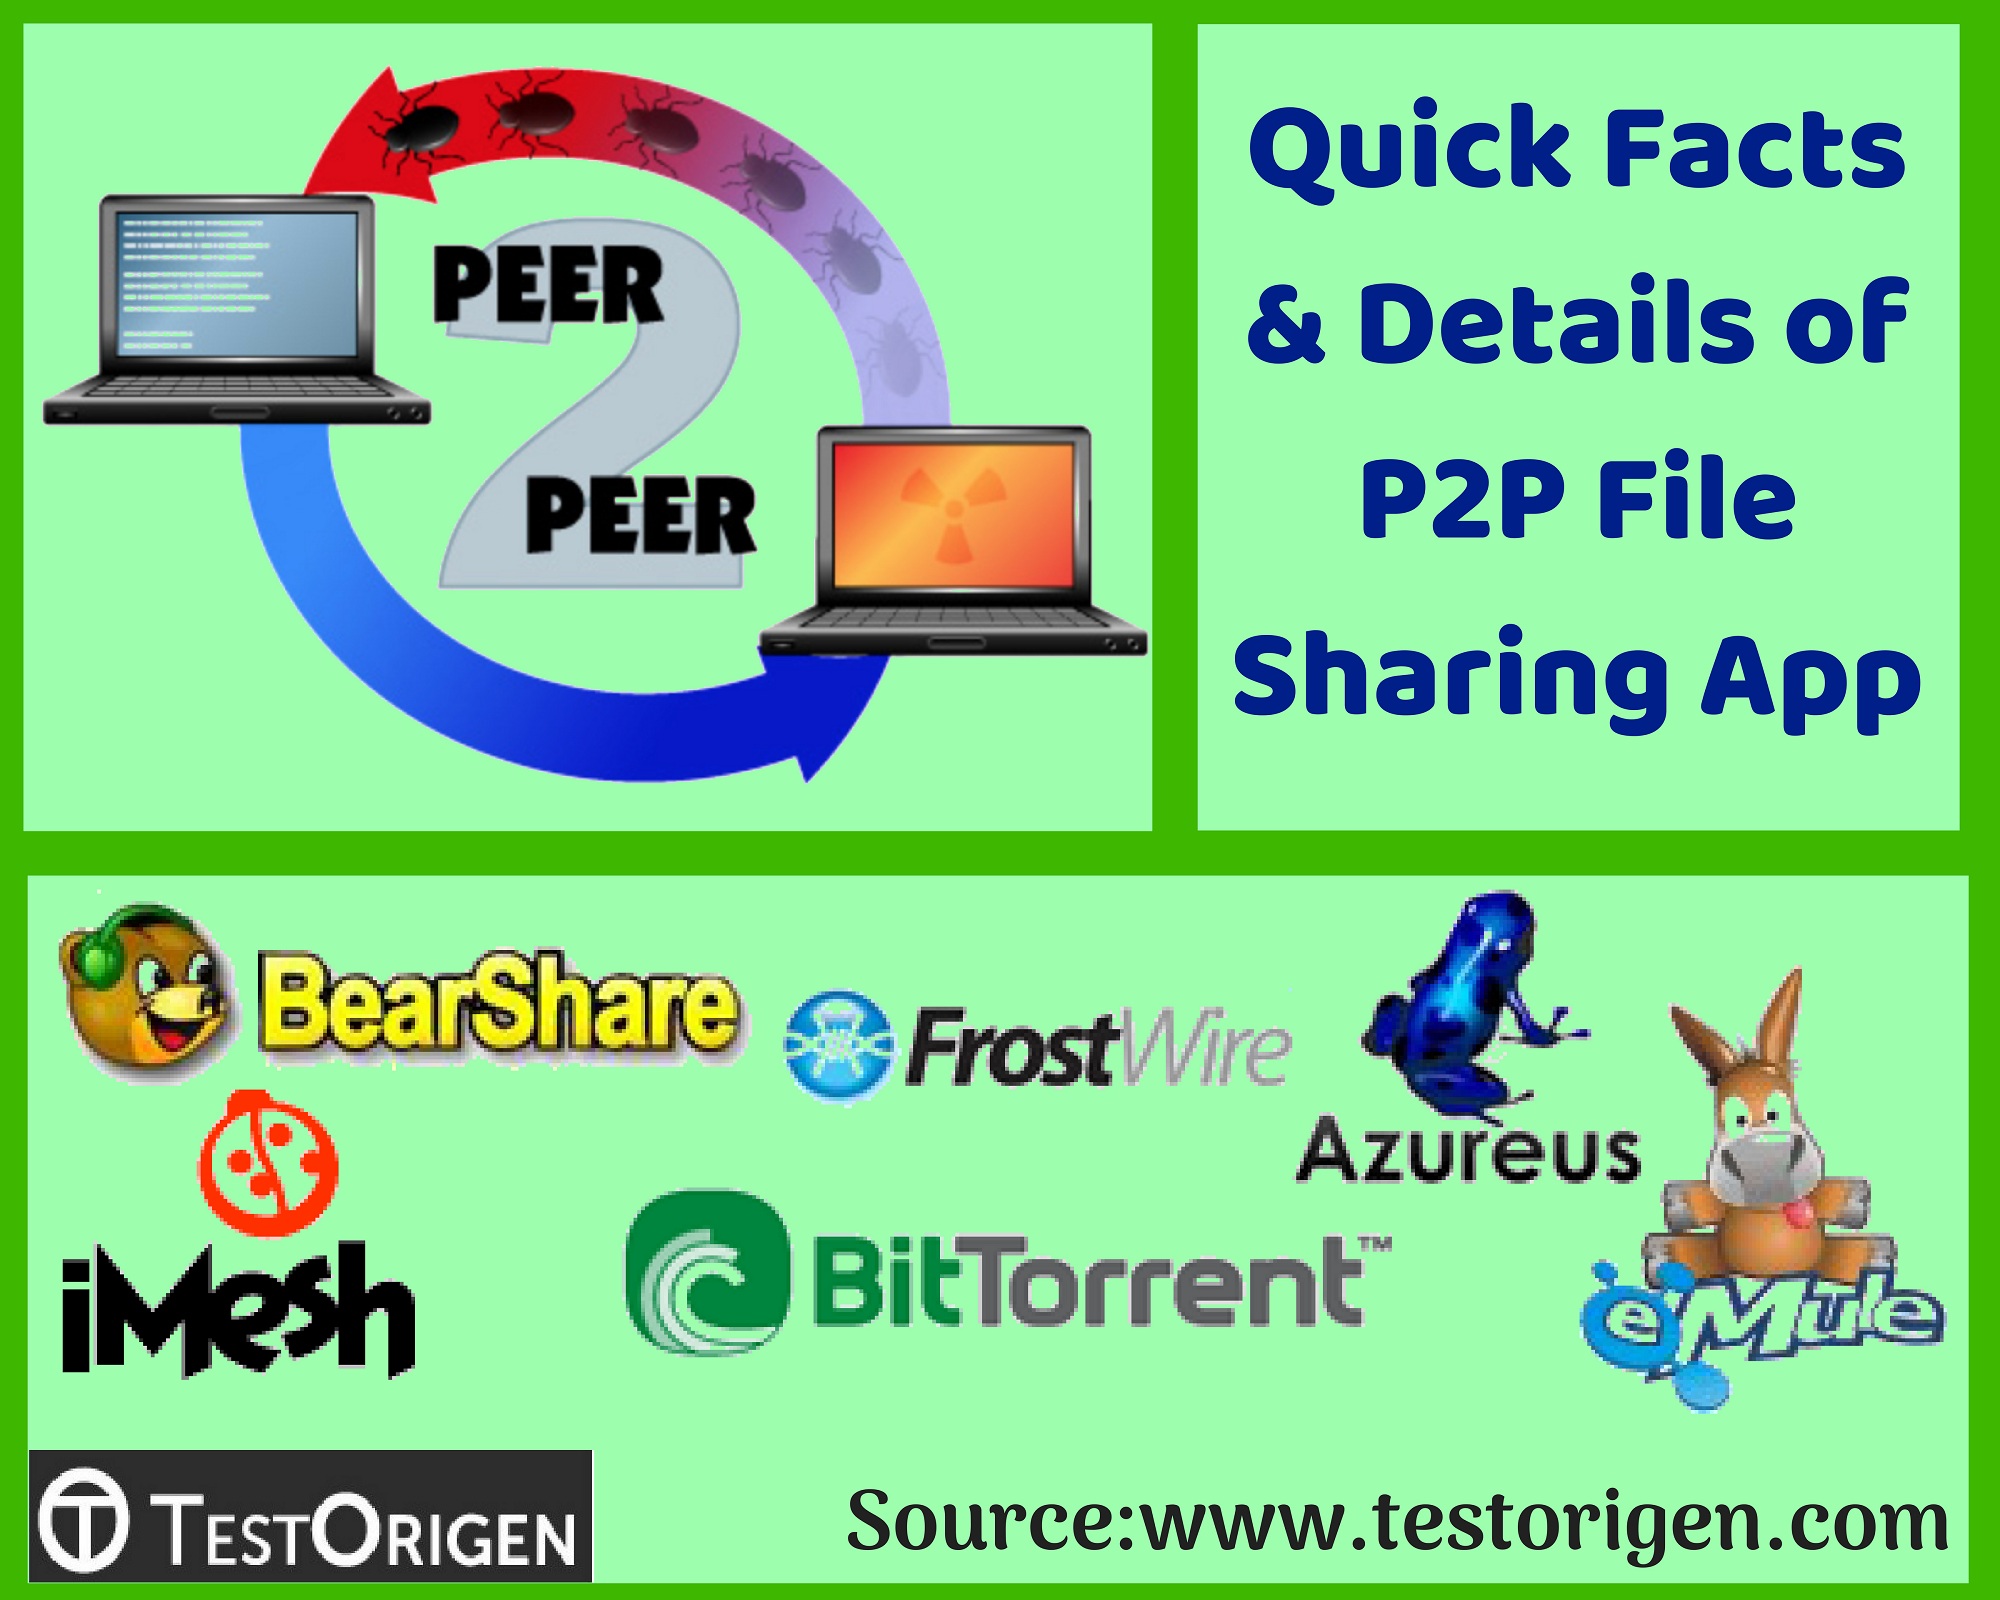 Quick Facts & Details of P2P File Sharing App